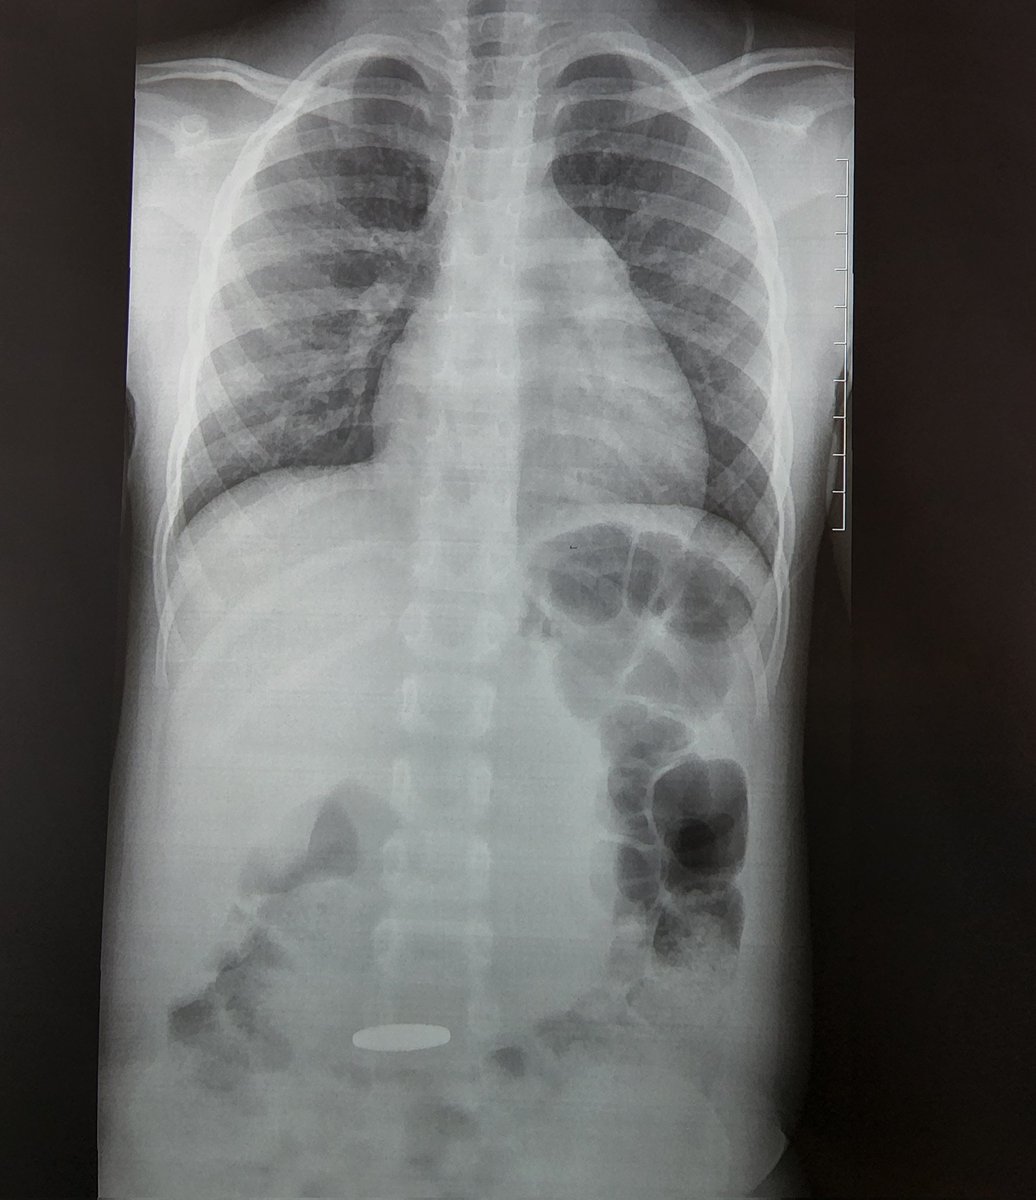 4yr old child. What can you see on the x-ray? How will you manage this child? #MedTwitter #RxTwitter